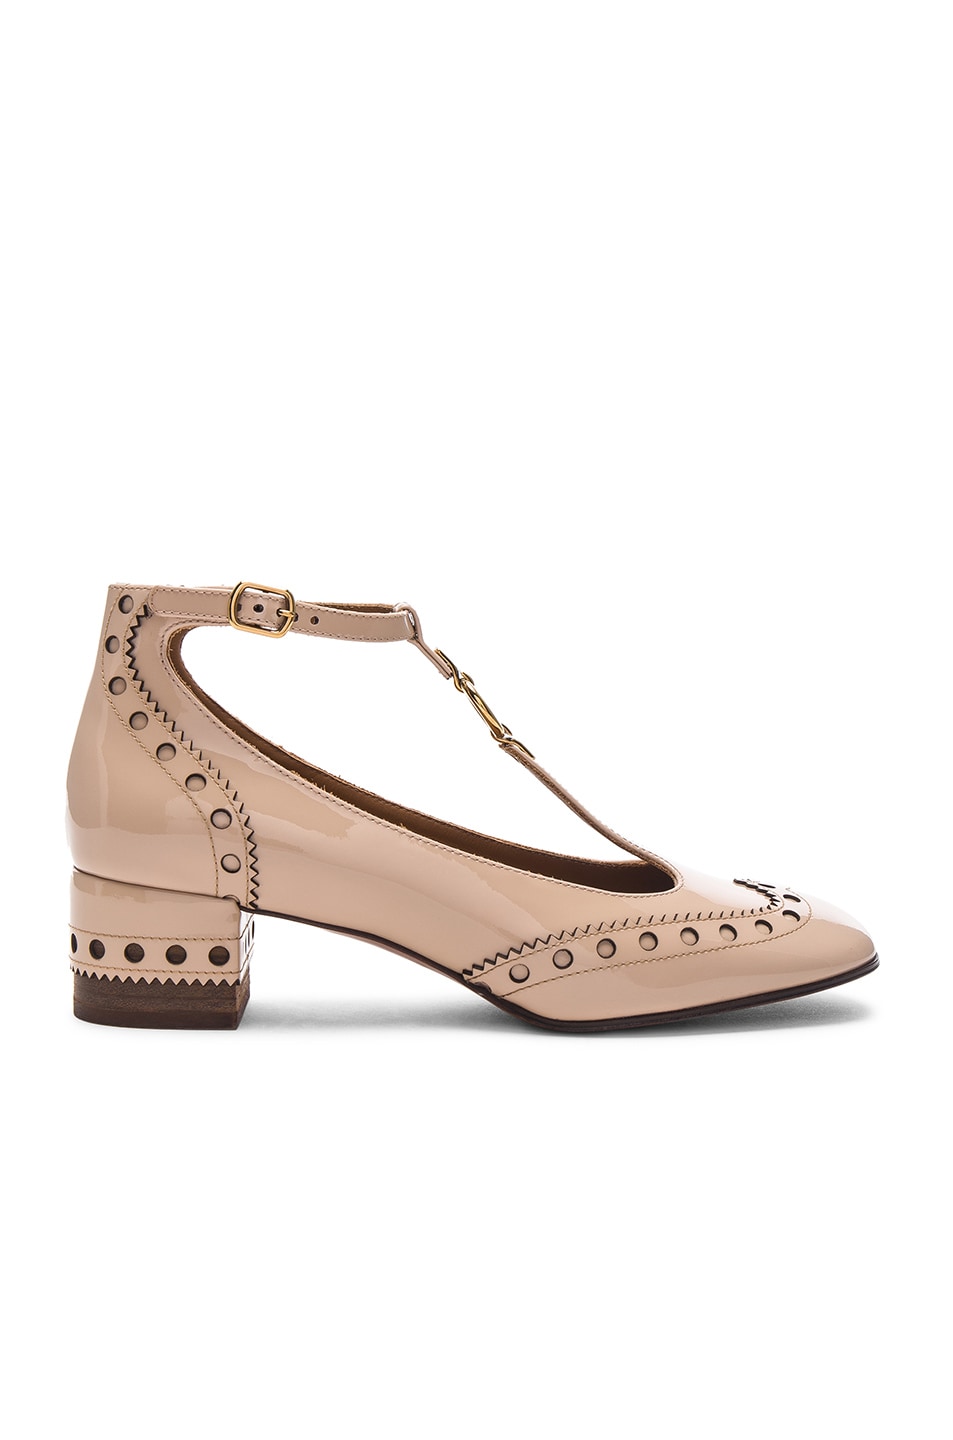 Image 1 of Chloe Perry Patent Leather Pumps in Milk Beige